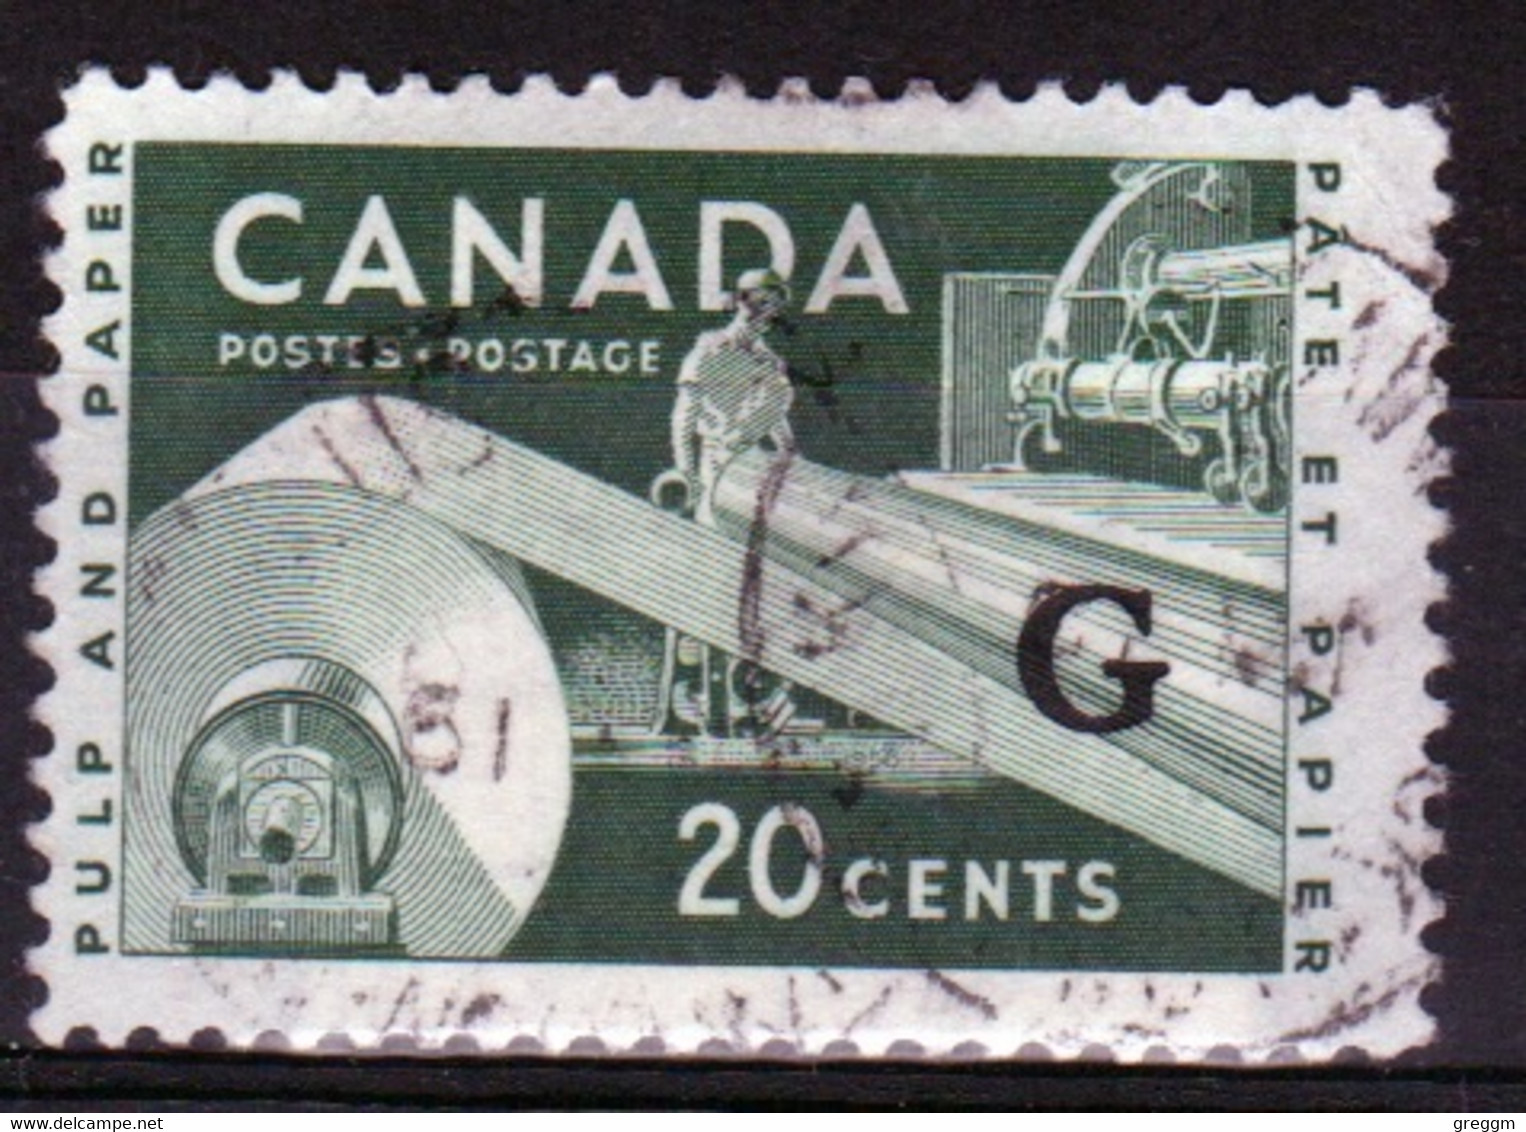 Canada 1955 Single 20c Stamps Overprinted 'G'. In Fine Used - Overprinted